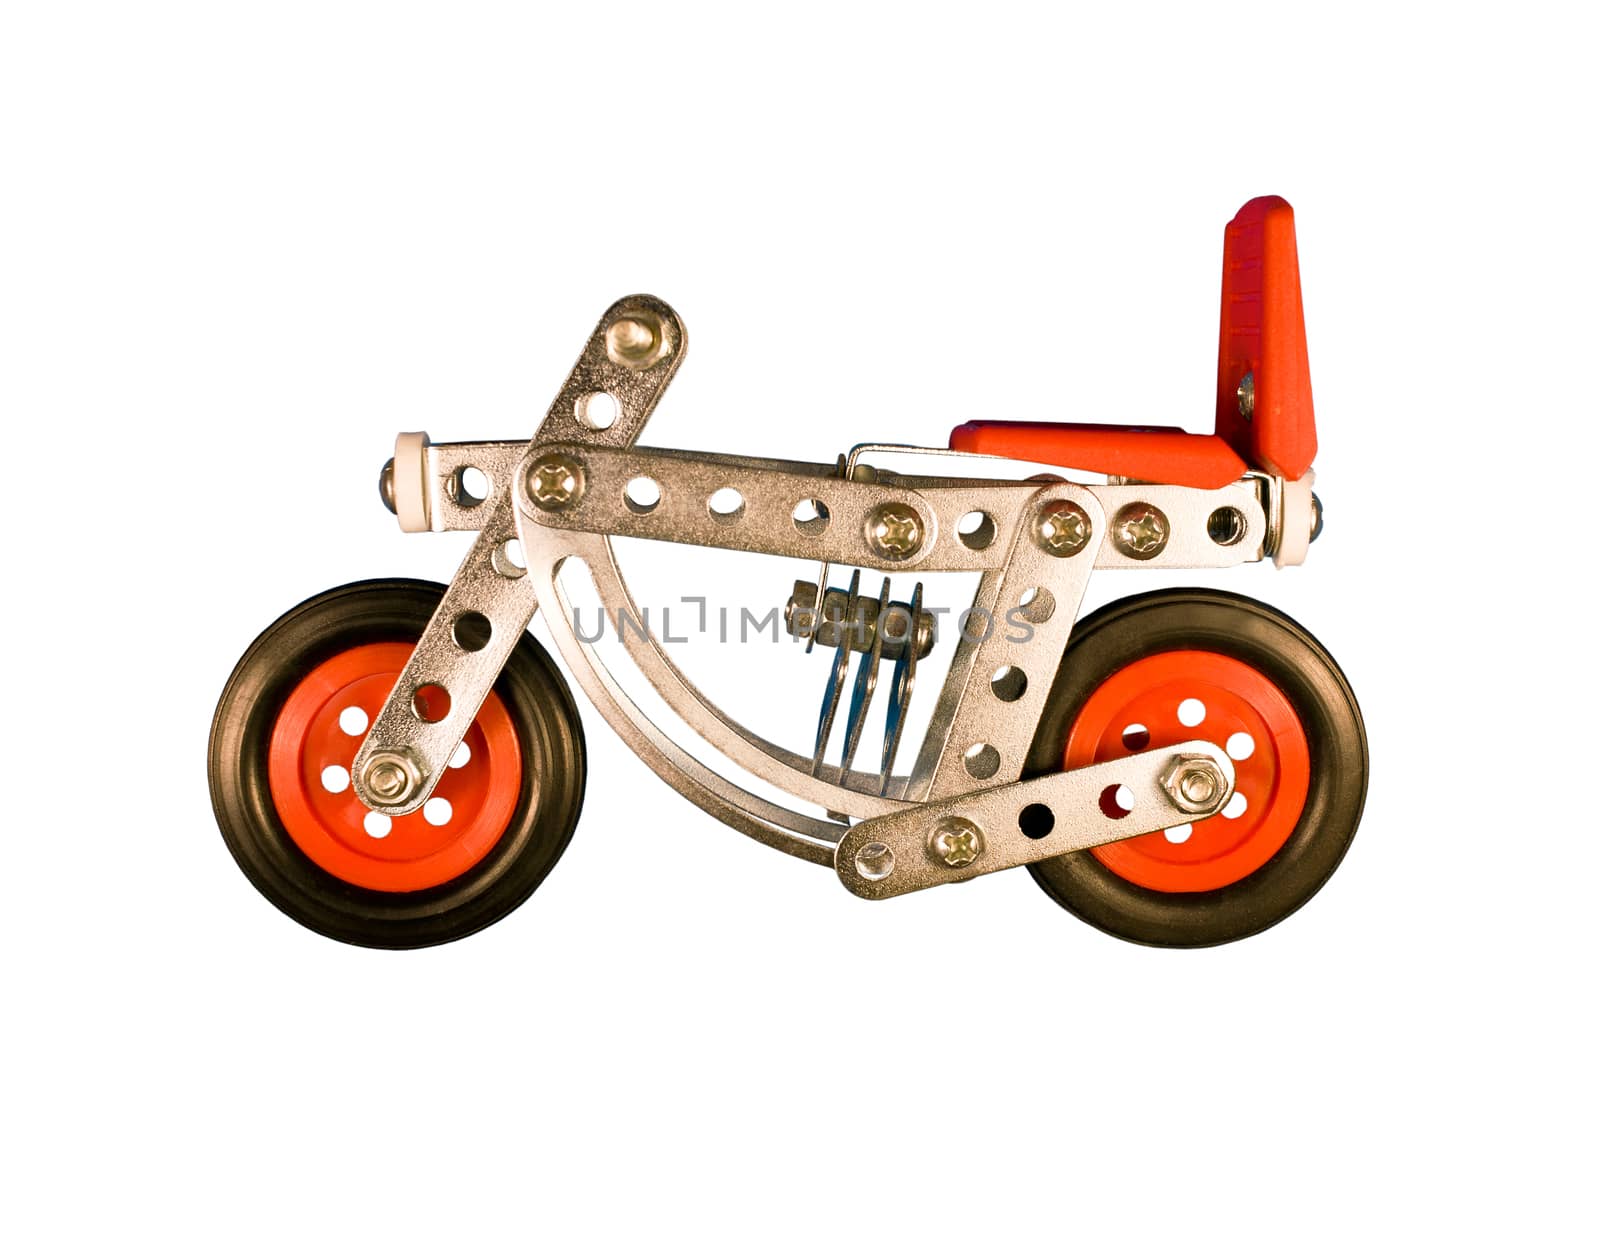 A toy - a two-wheeled motorcycle assembled from metal parts, isolated on white background